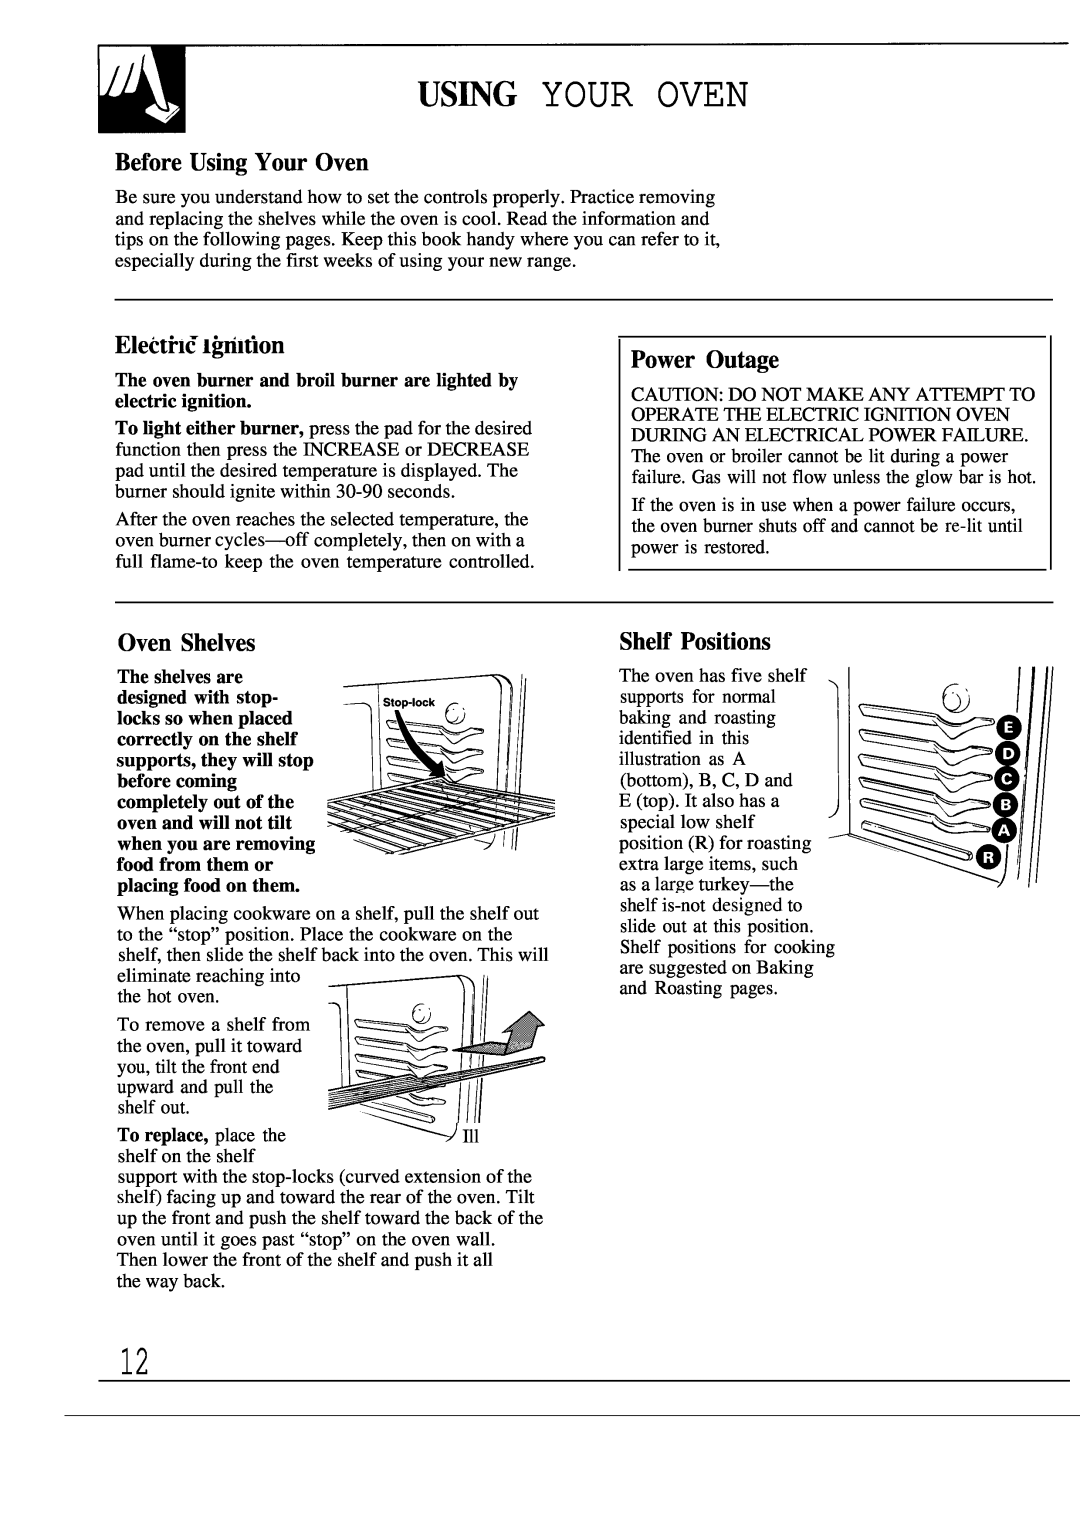 GE JGBP38GES manual USmG YOUR OVEN, Before Using Your Oven, Wlectrlc lgnltlon, Power Outage, Oven Shelves, Shelf Positions 